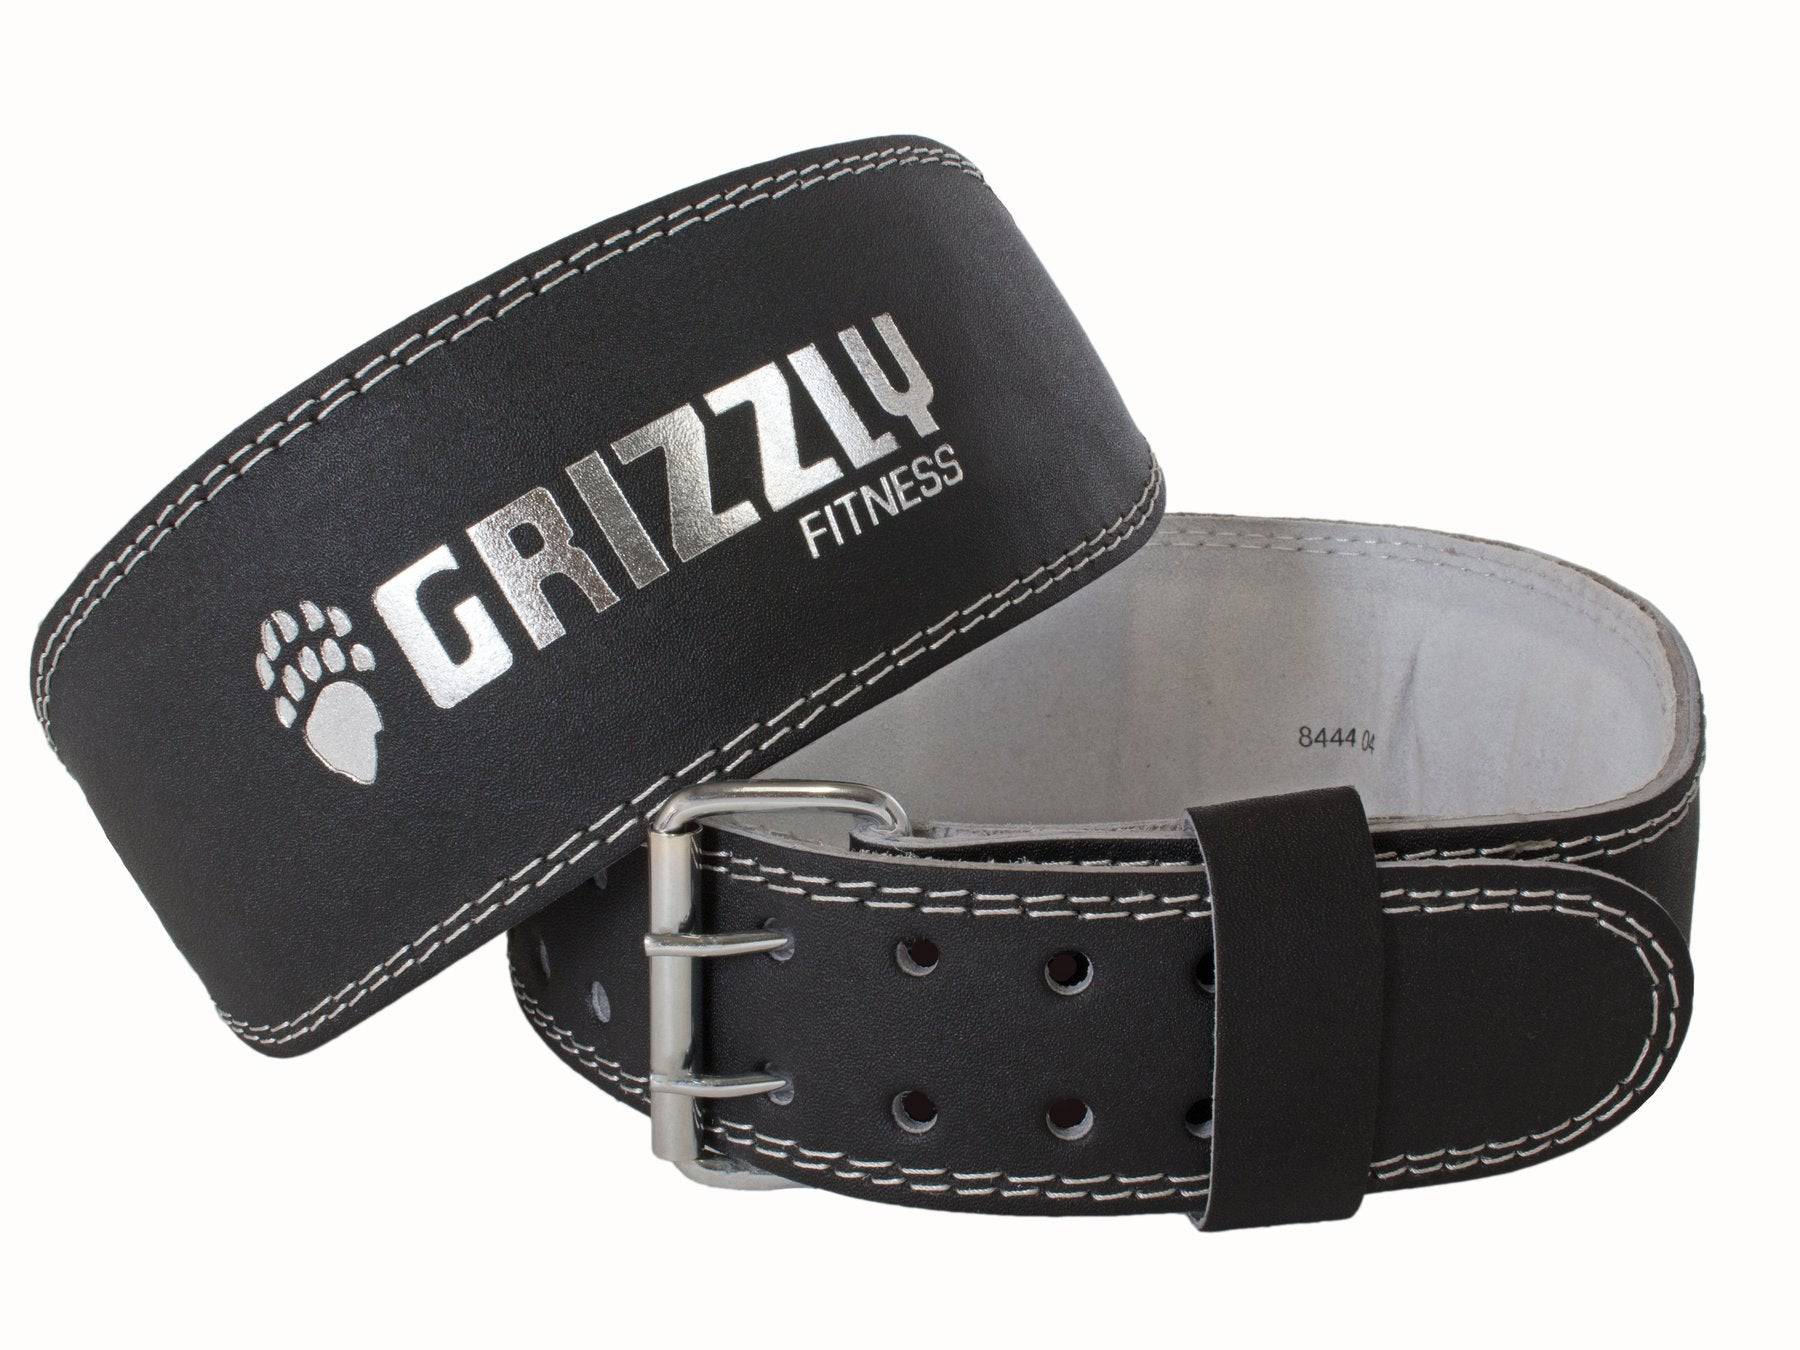 Grizzly Fitness | Padded Pacesetter Training Belt - XTC Fitness - Exercise Equipment Superstore - Canada - Leather Weightlifting Belt